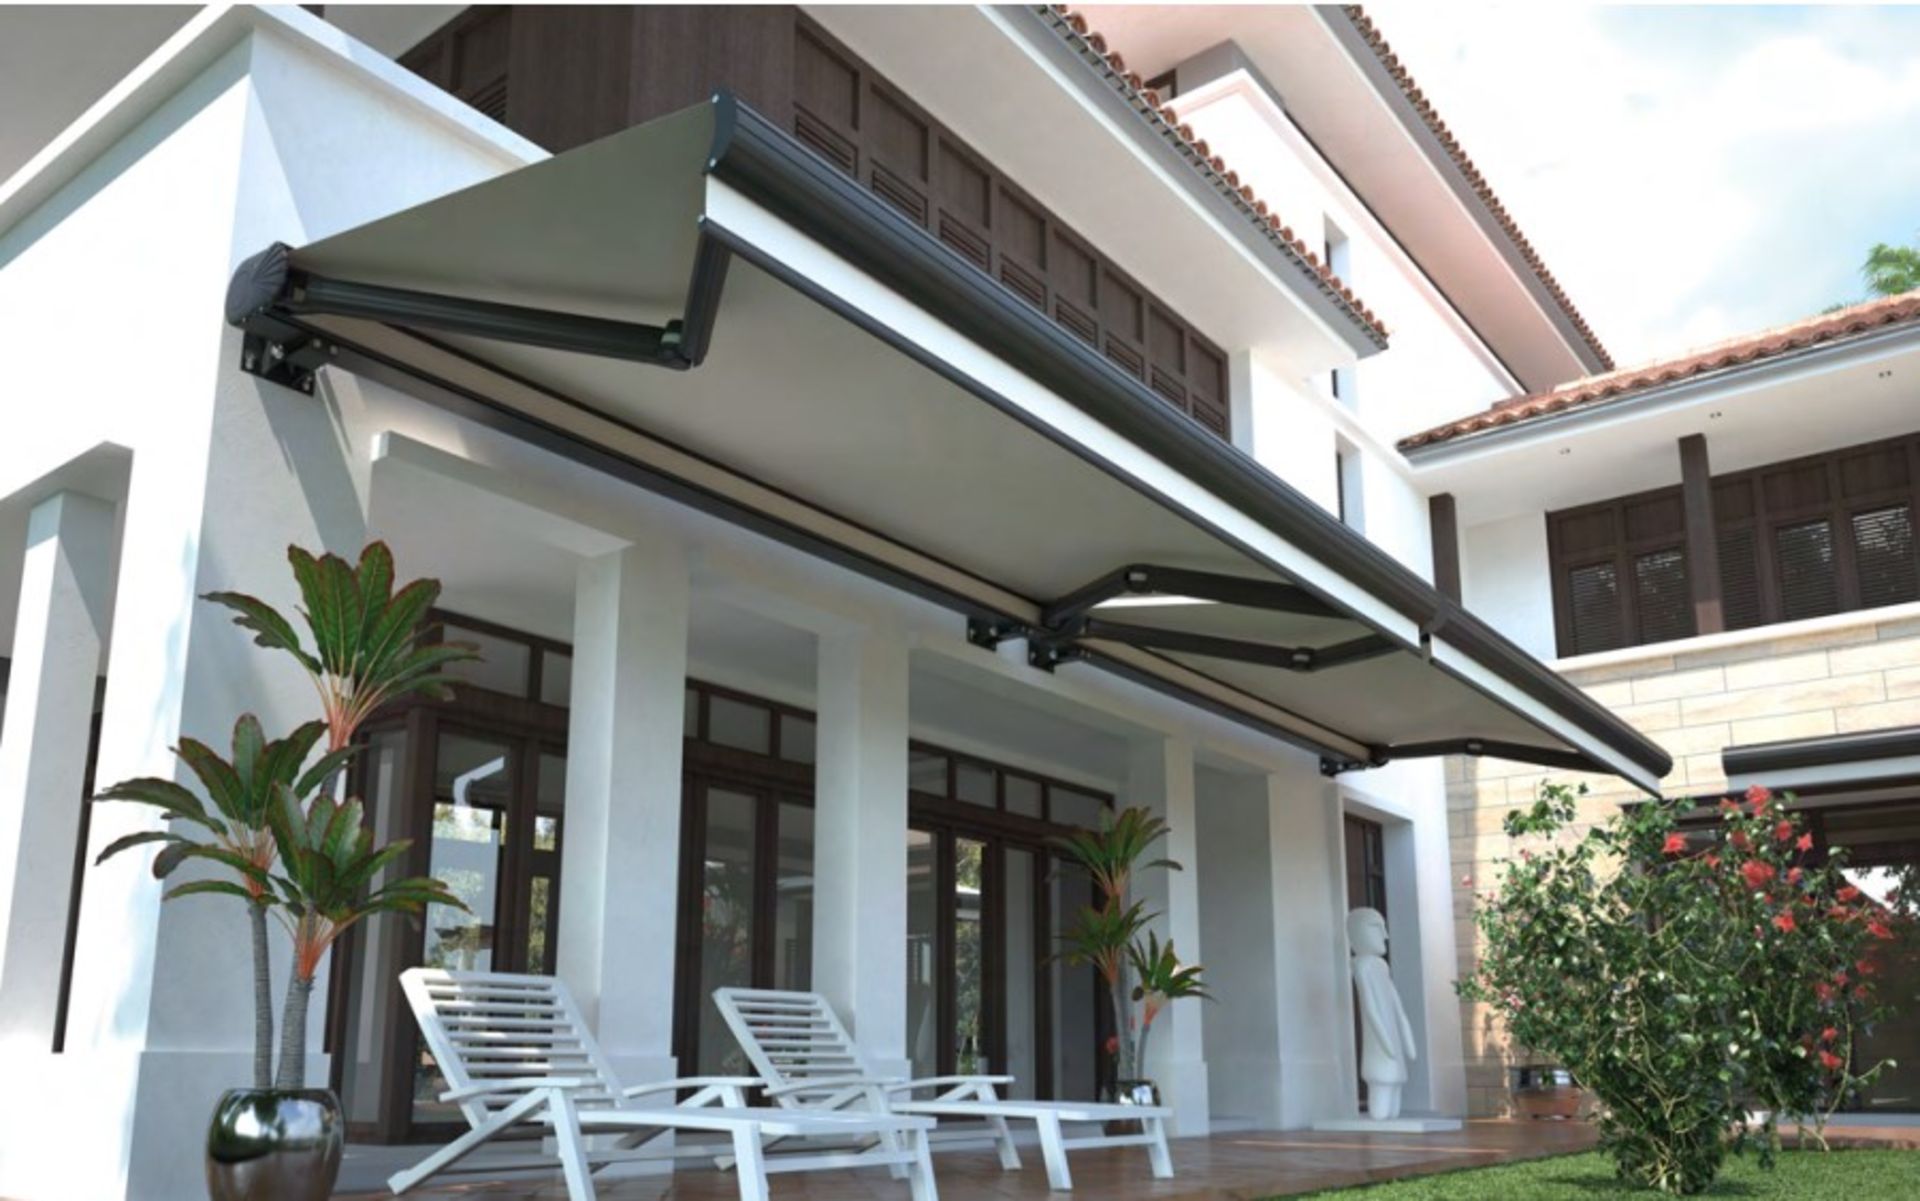 New Orion fully electric Cassette Awning with remote control| 4m width and 3 mtr projection,